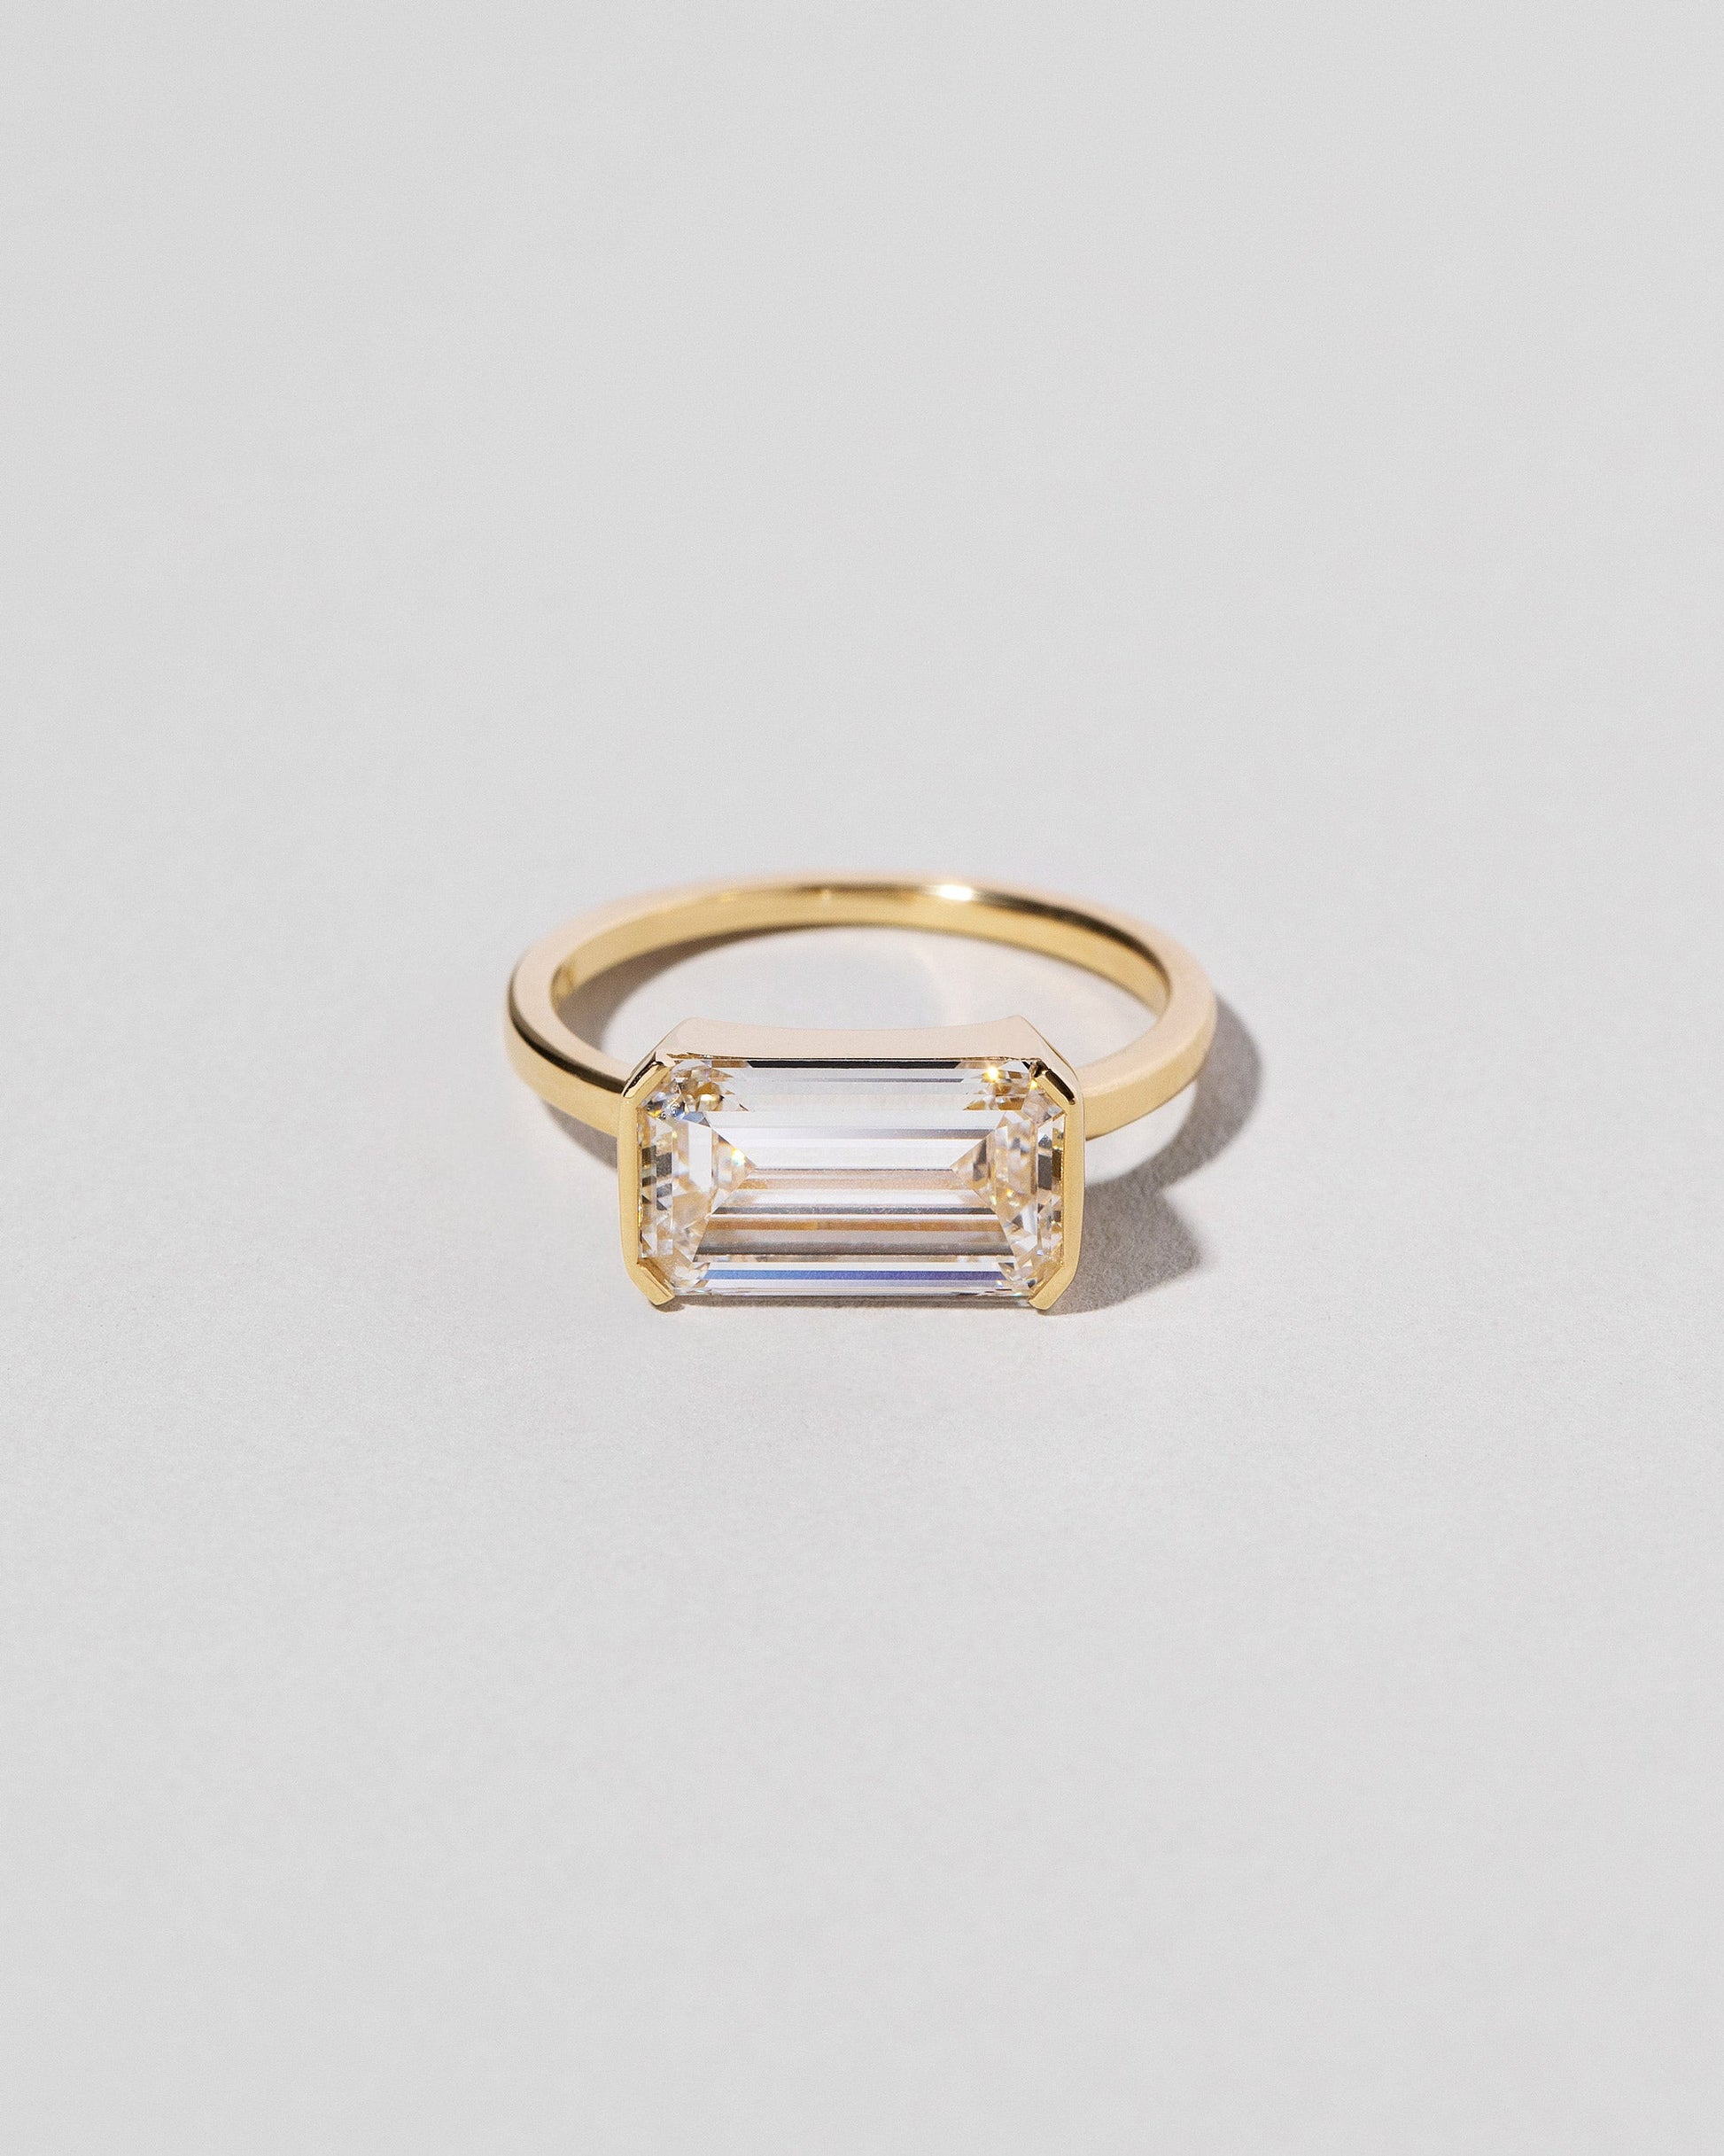  Emerald Cut Diamond Solitaire Ring on light color background.